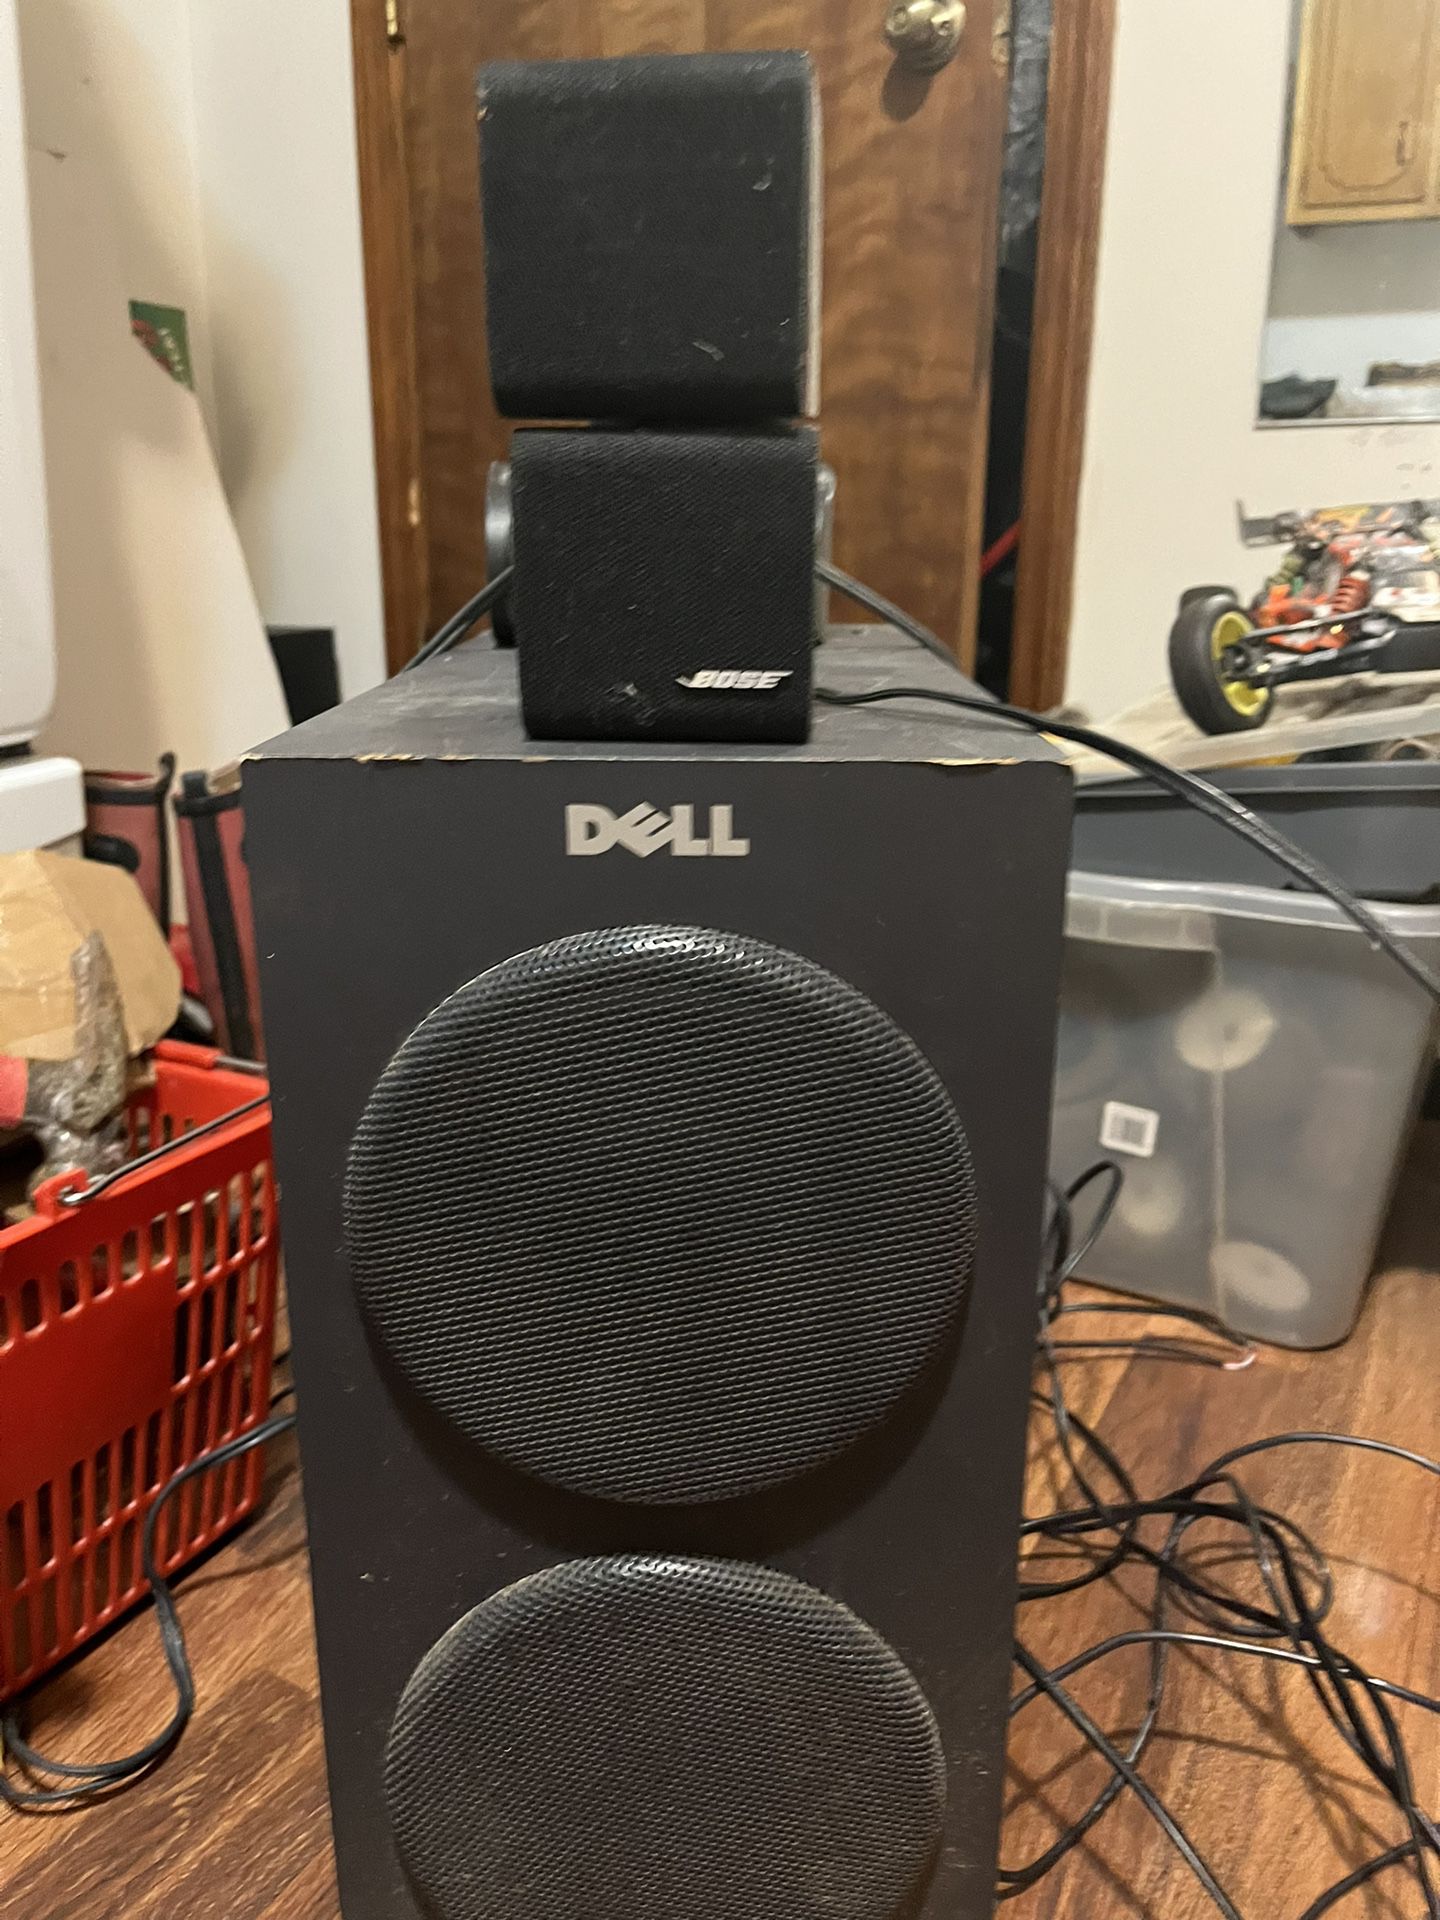 Dell Sub Woofer And Speakers 